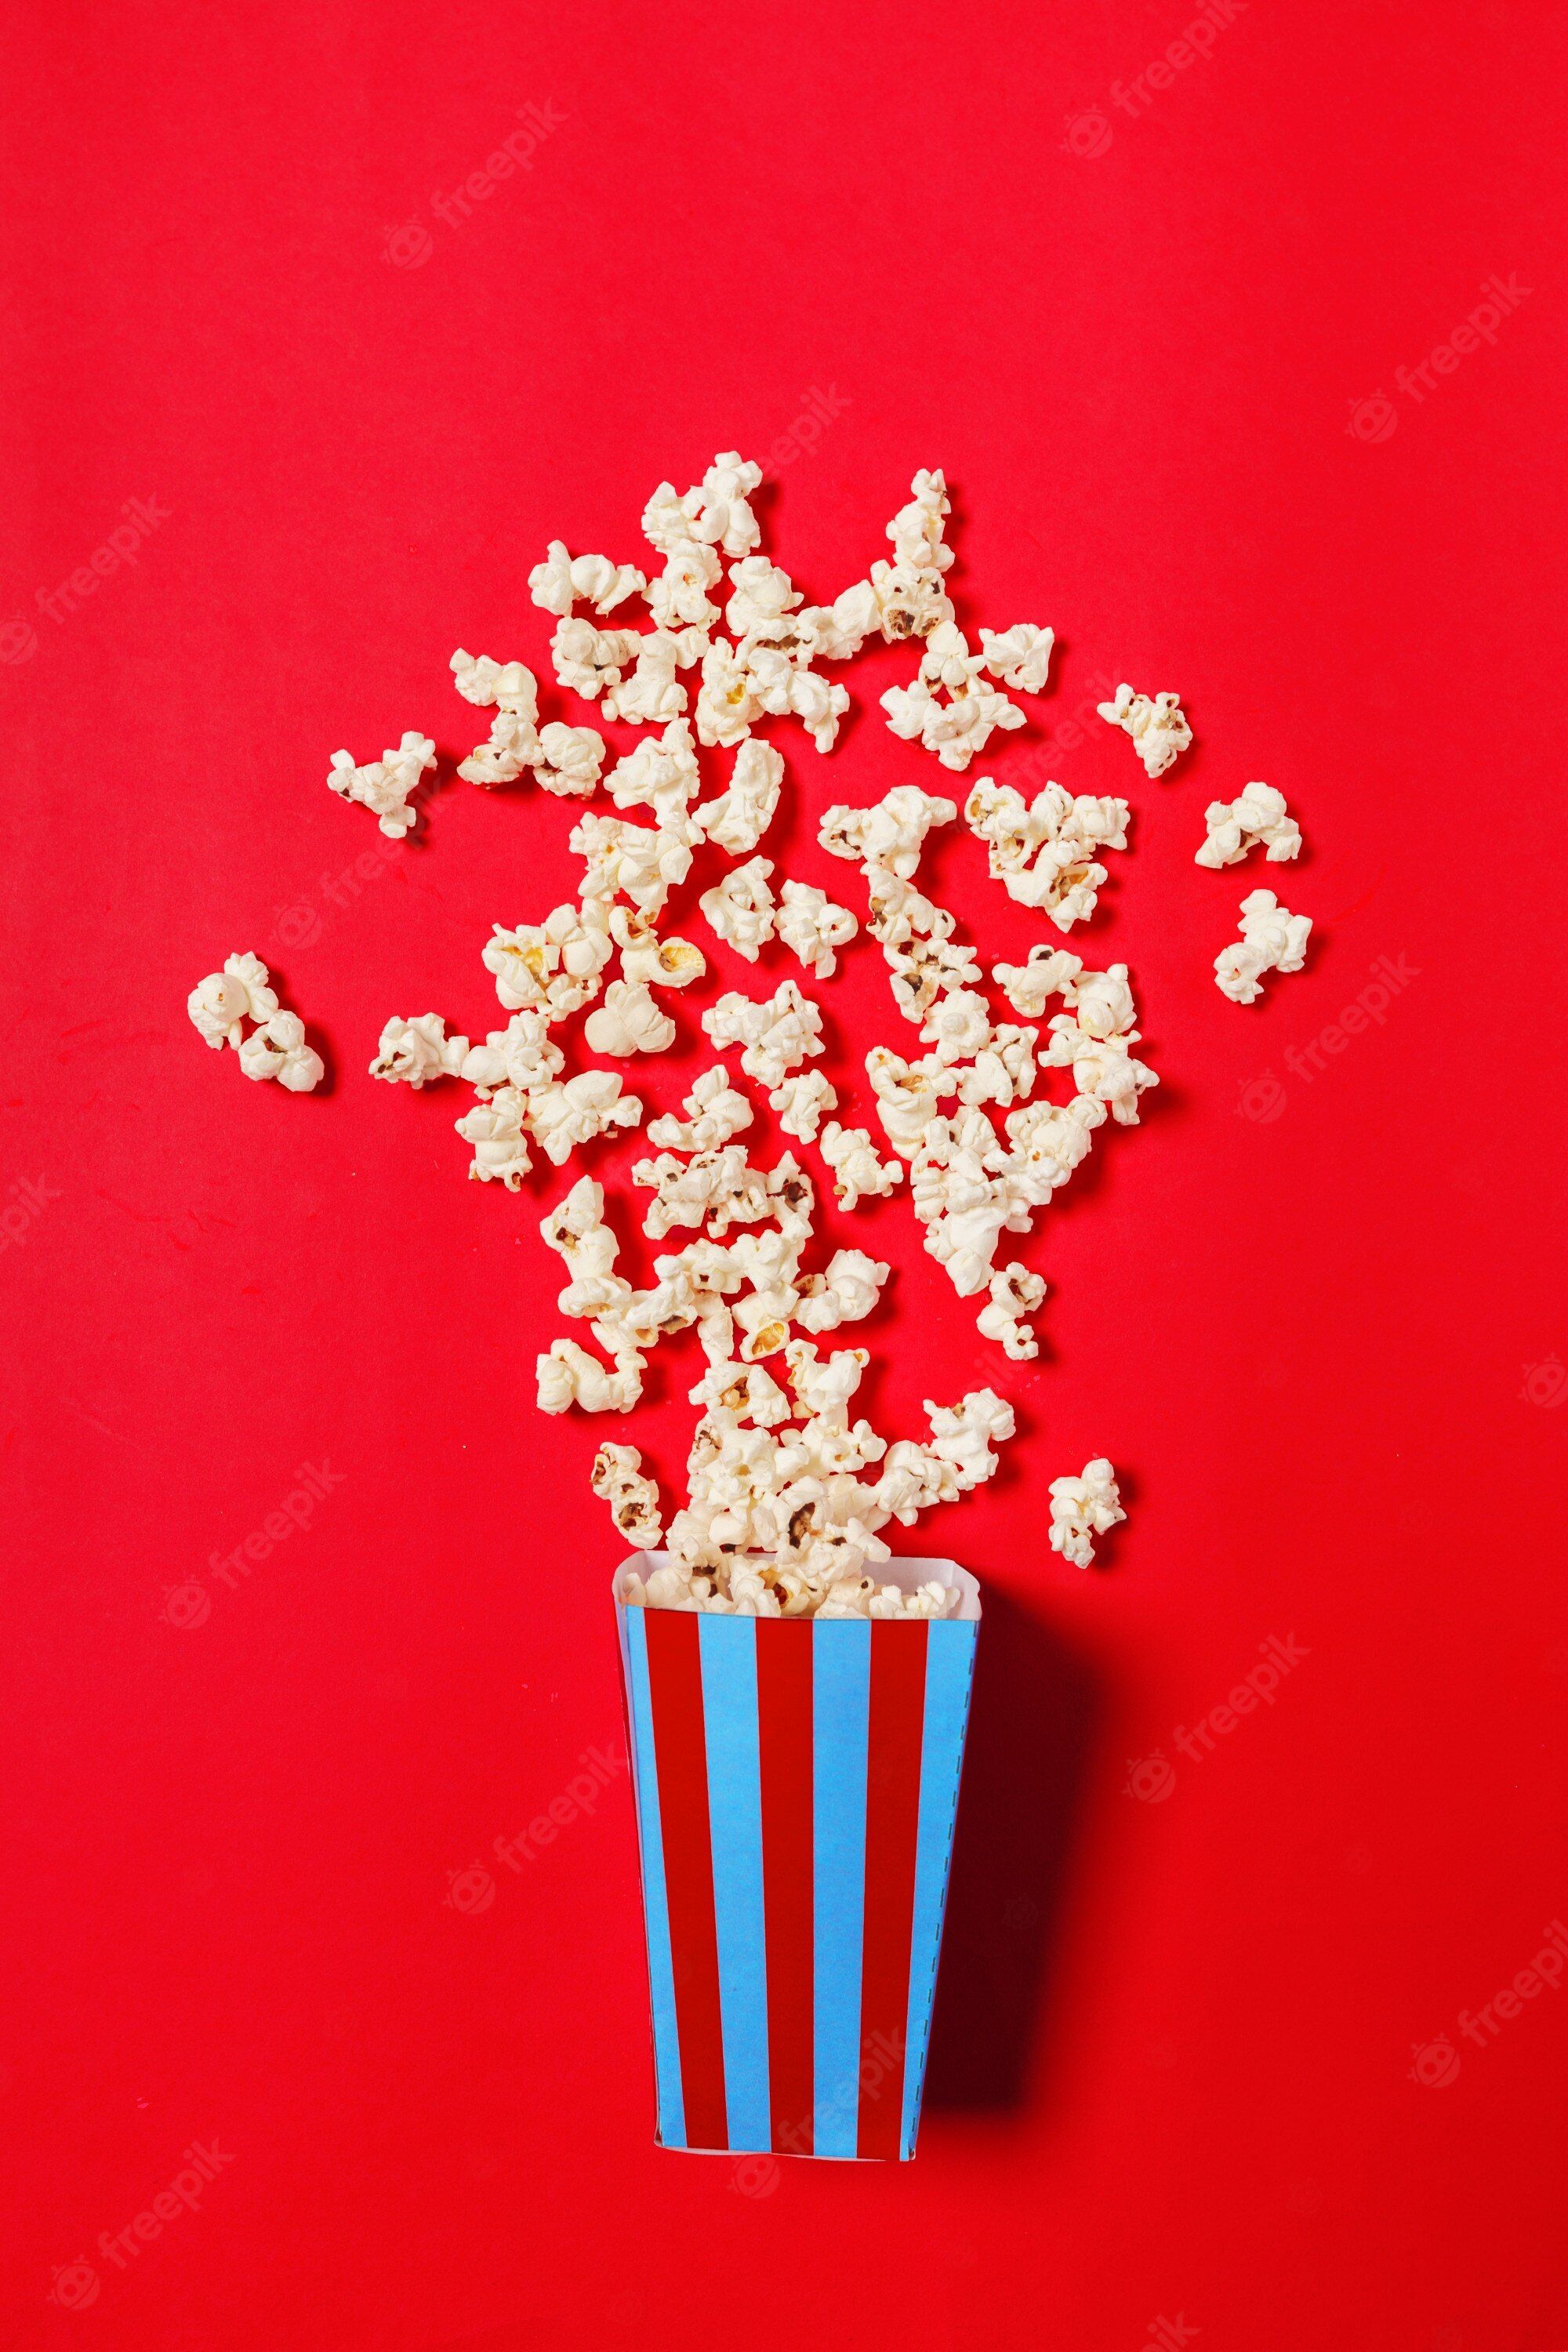 Popcorn in a blue box on red background - Popcorn